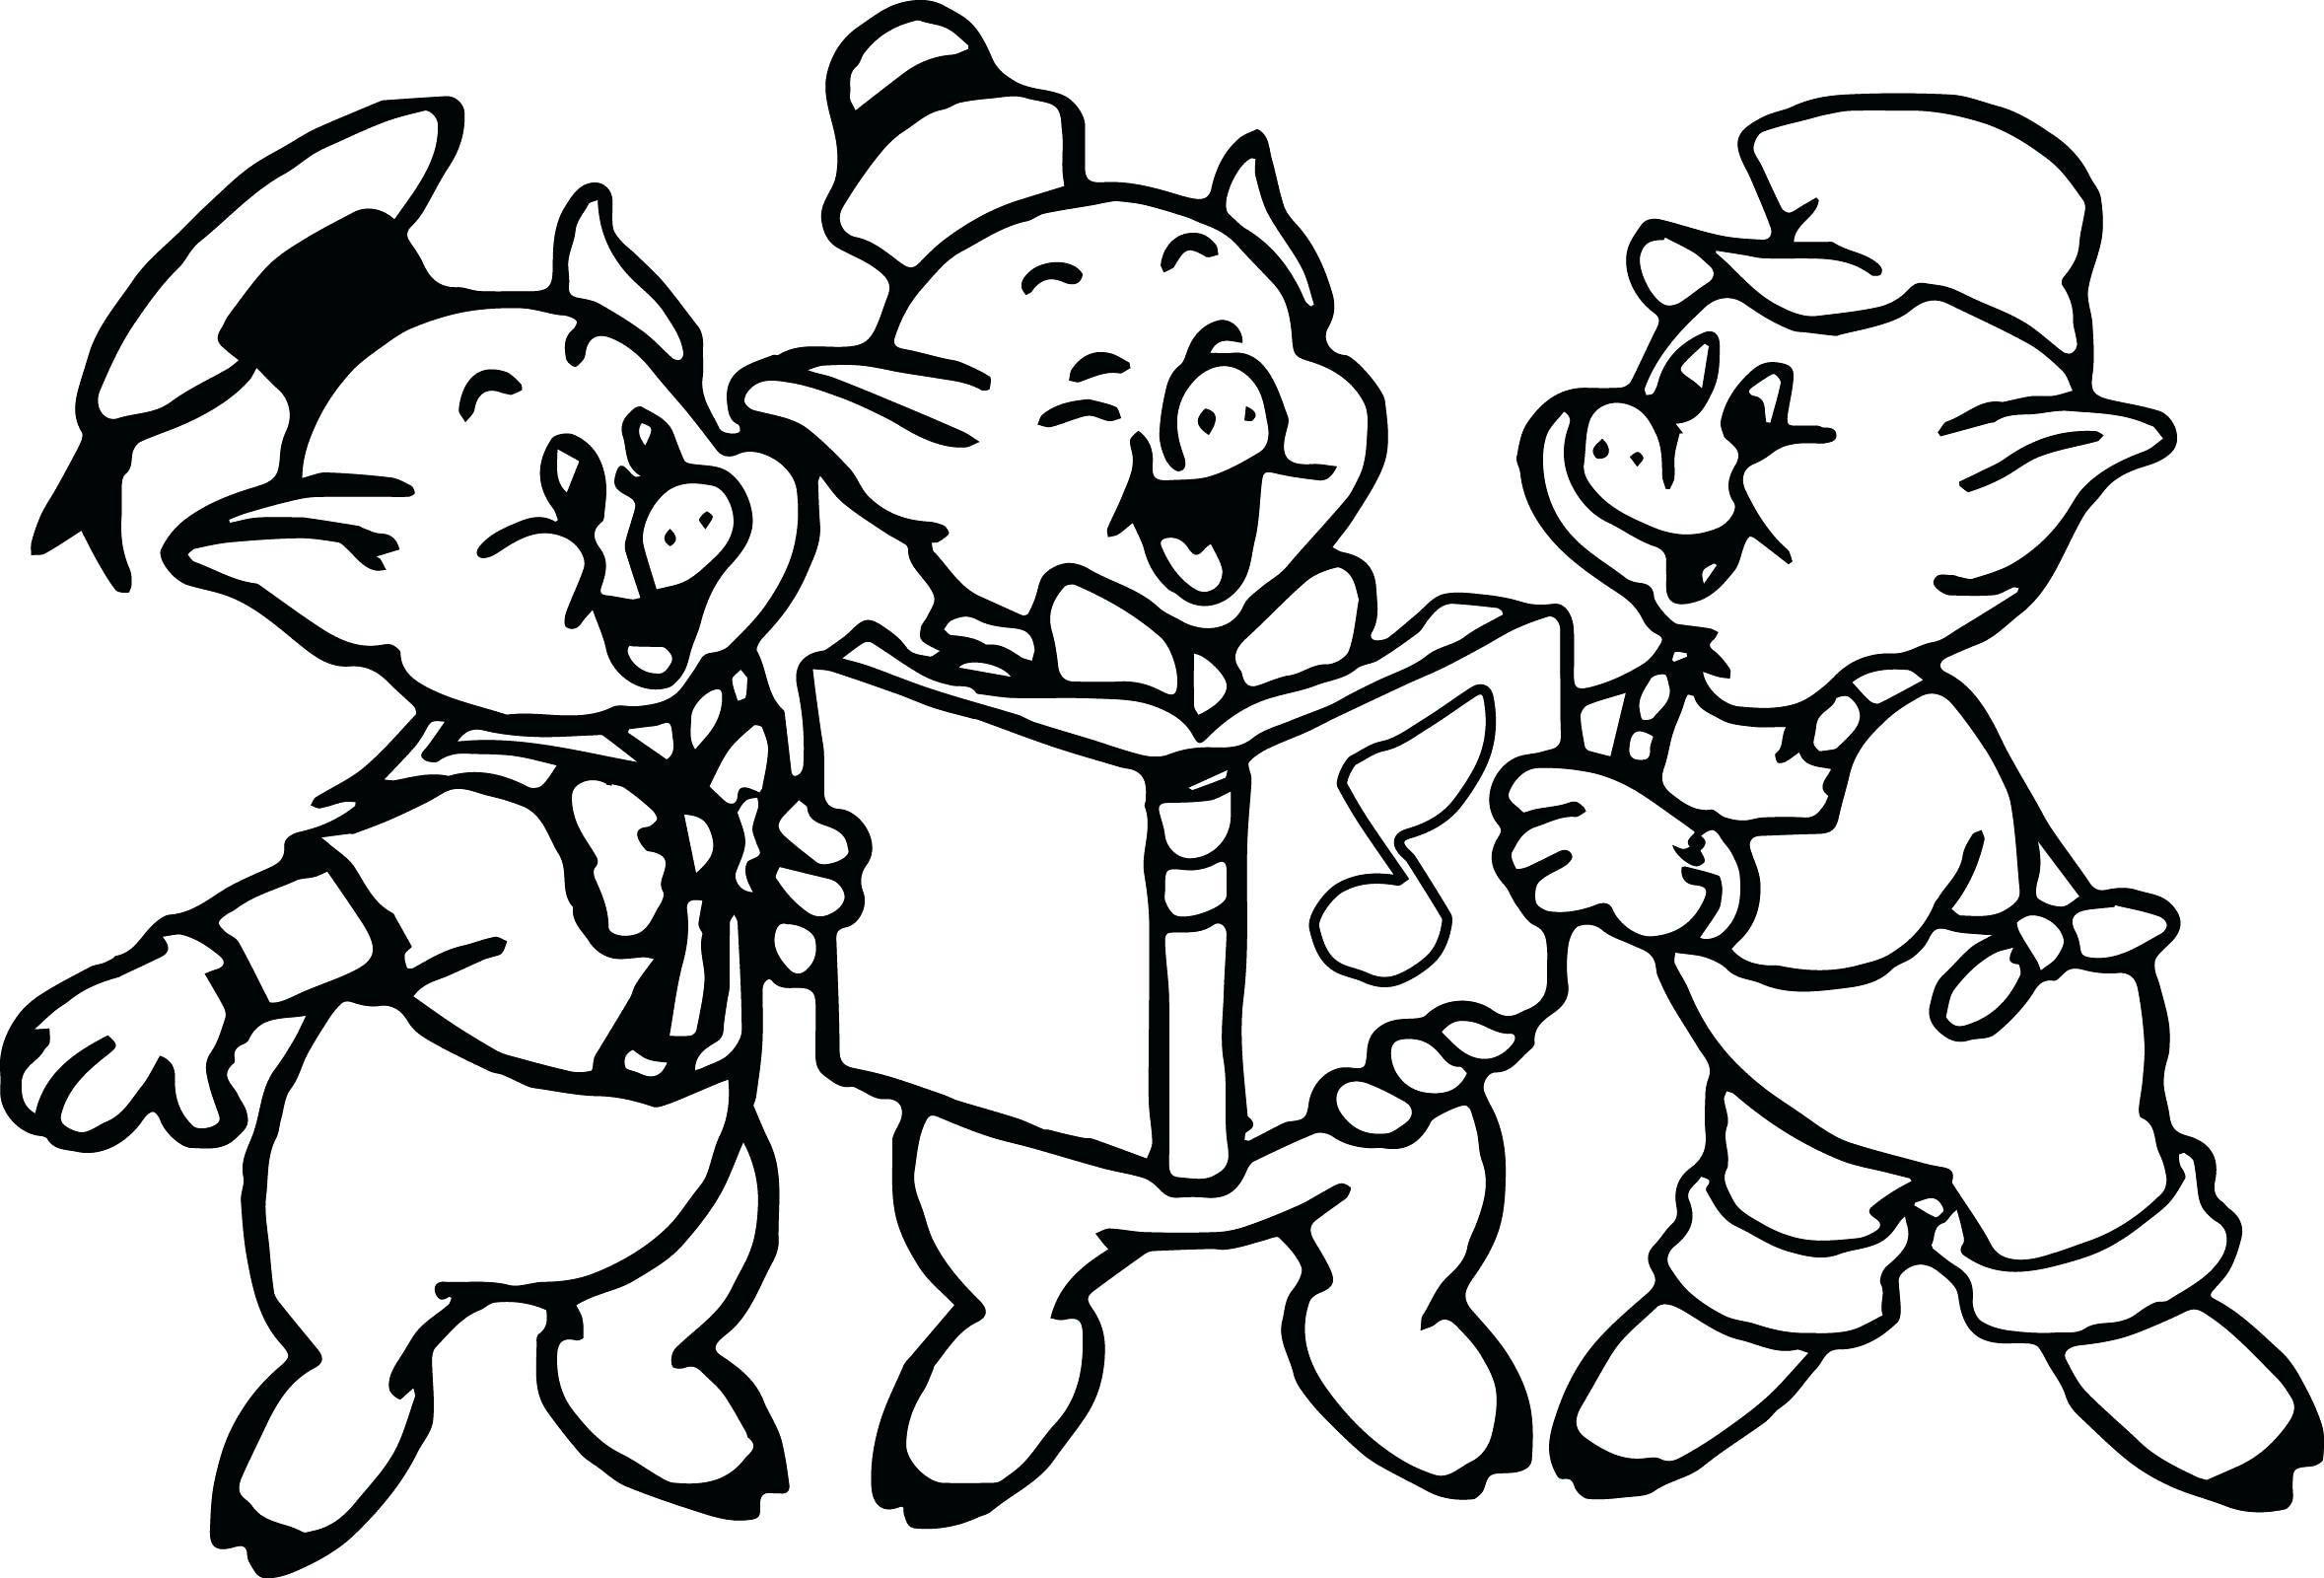 Three Little Pigs Coloring Pages at GetDrawings Free download